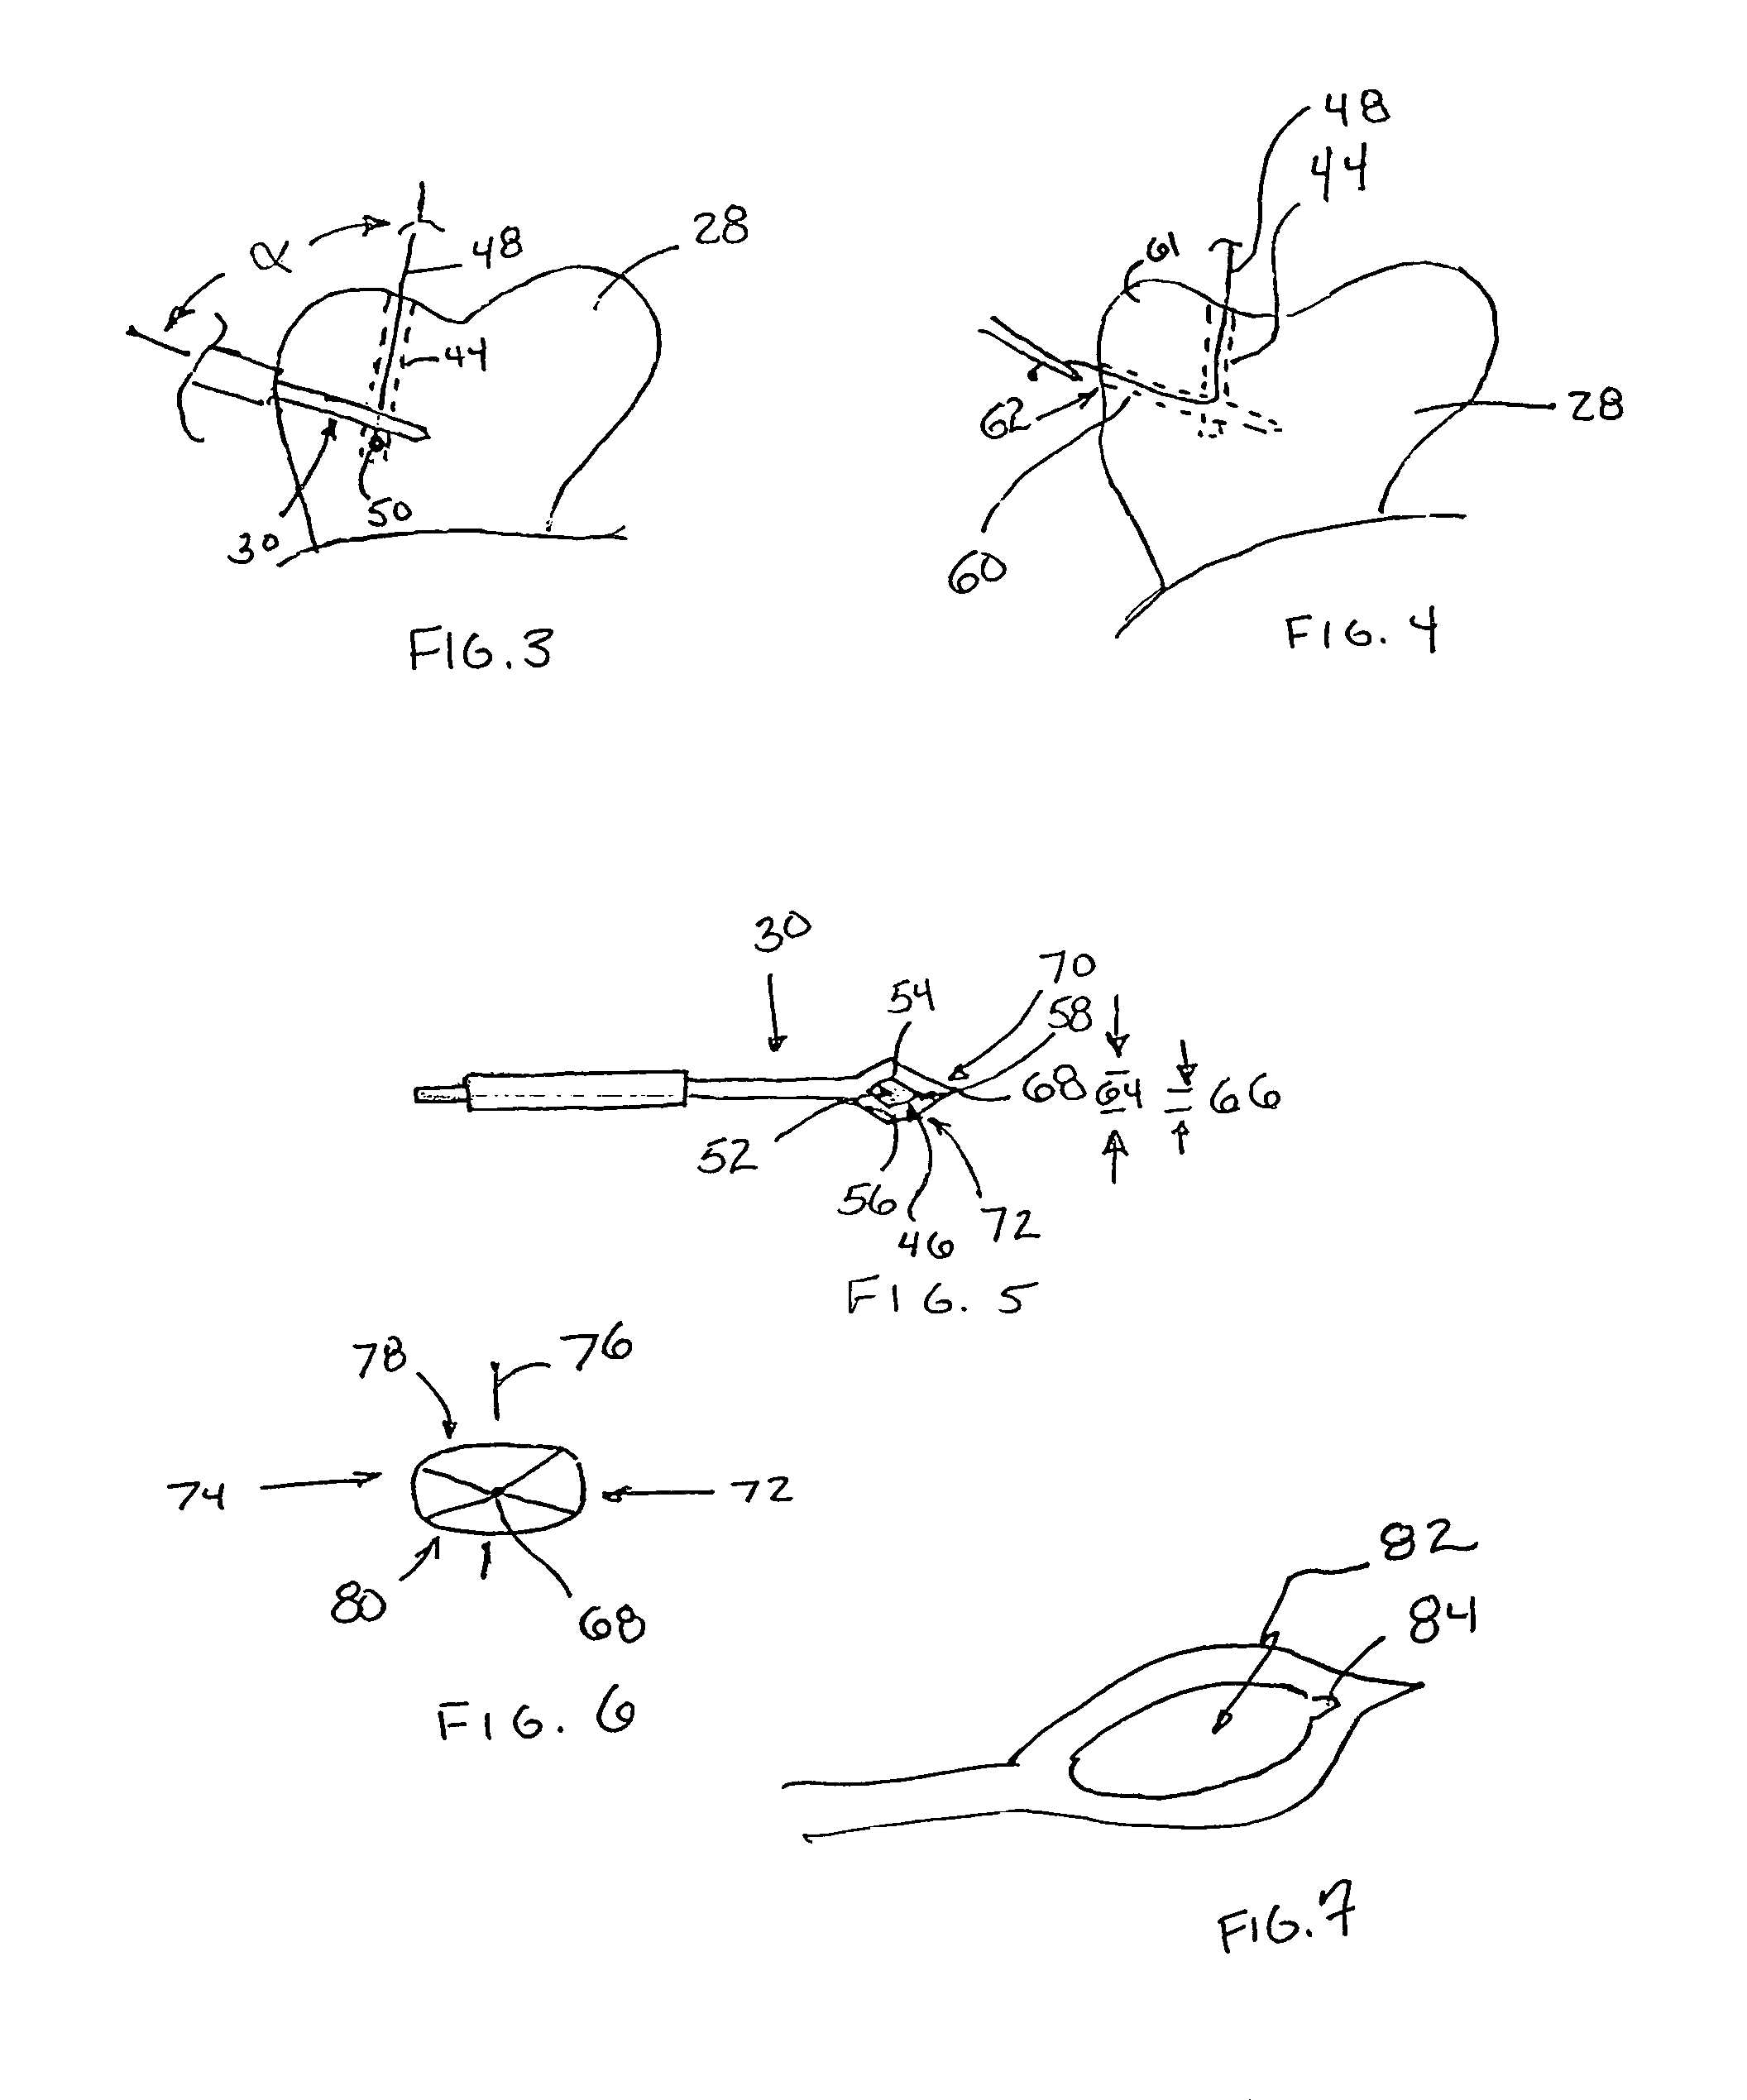 Surgical drill guide with awl and method of use